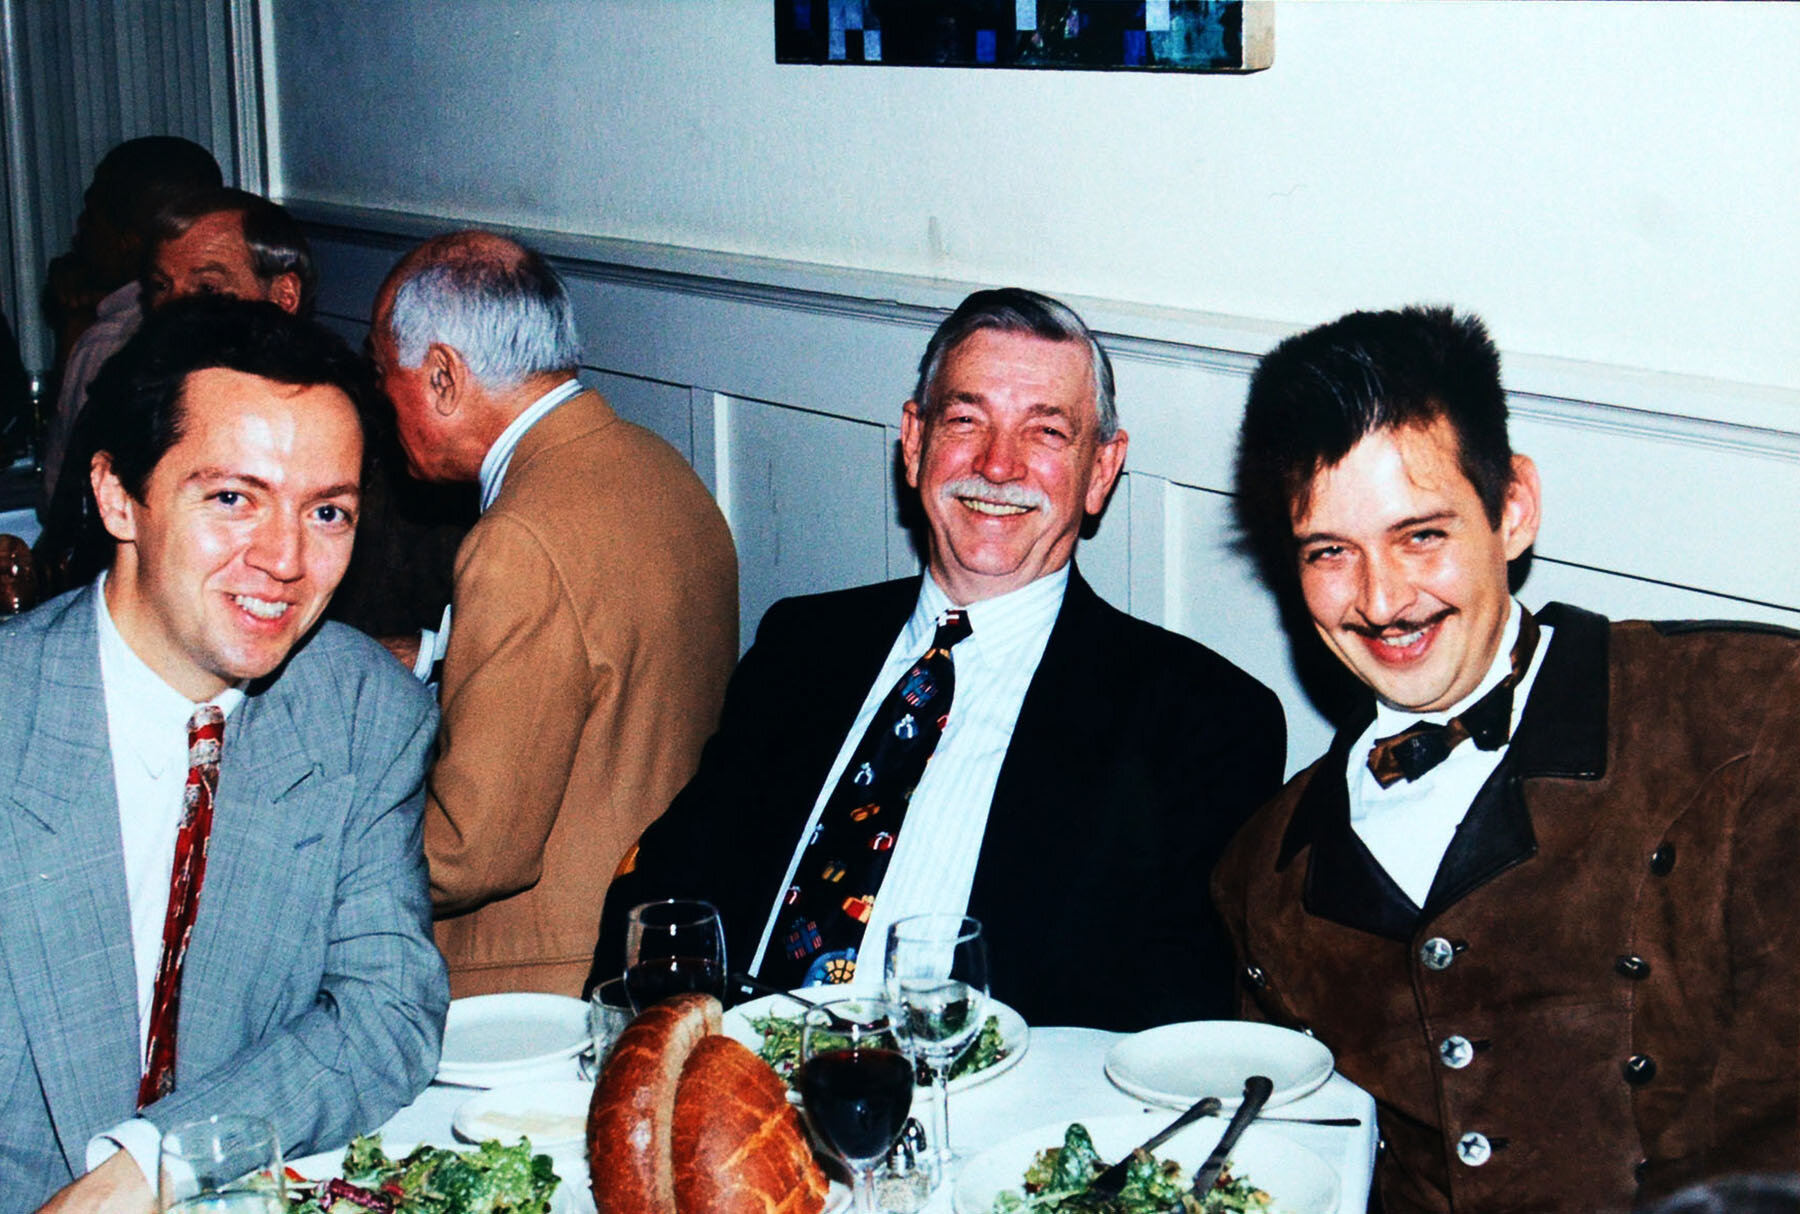  Bevan Dufty, Bob Ross and Mike Salinas, 1993; courtesy of Rick Gerharter. 